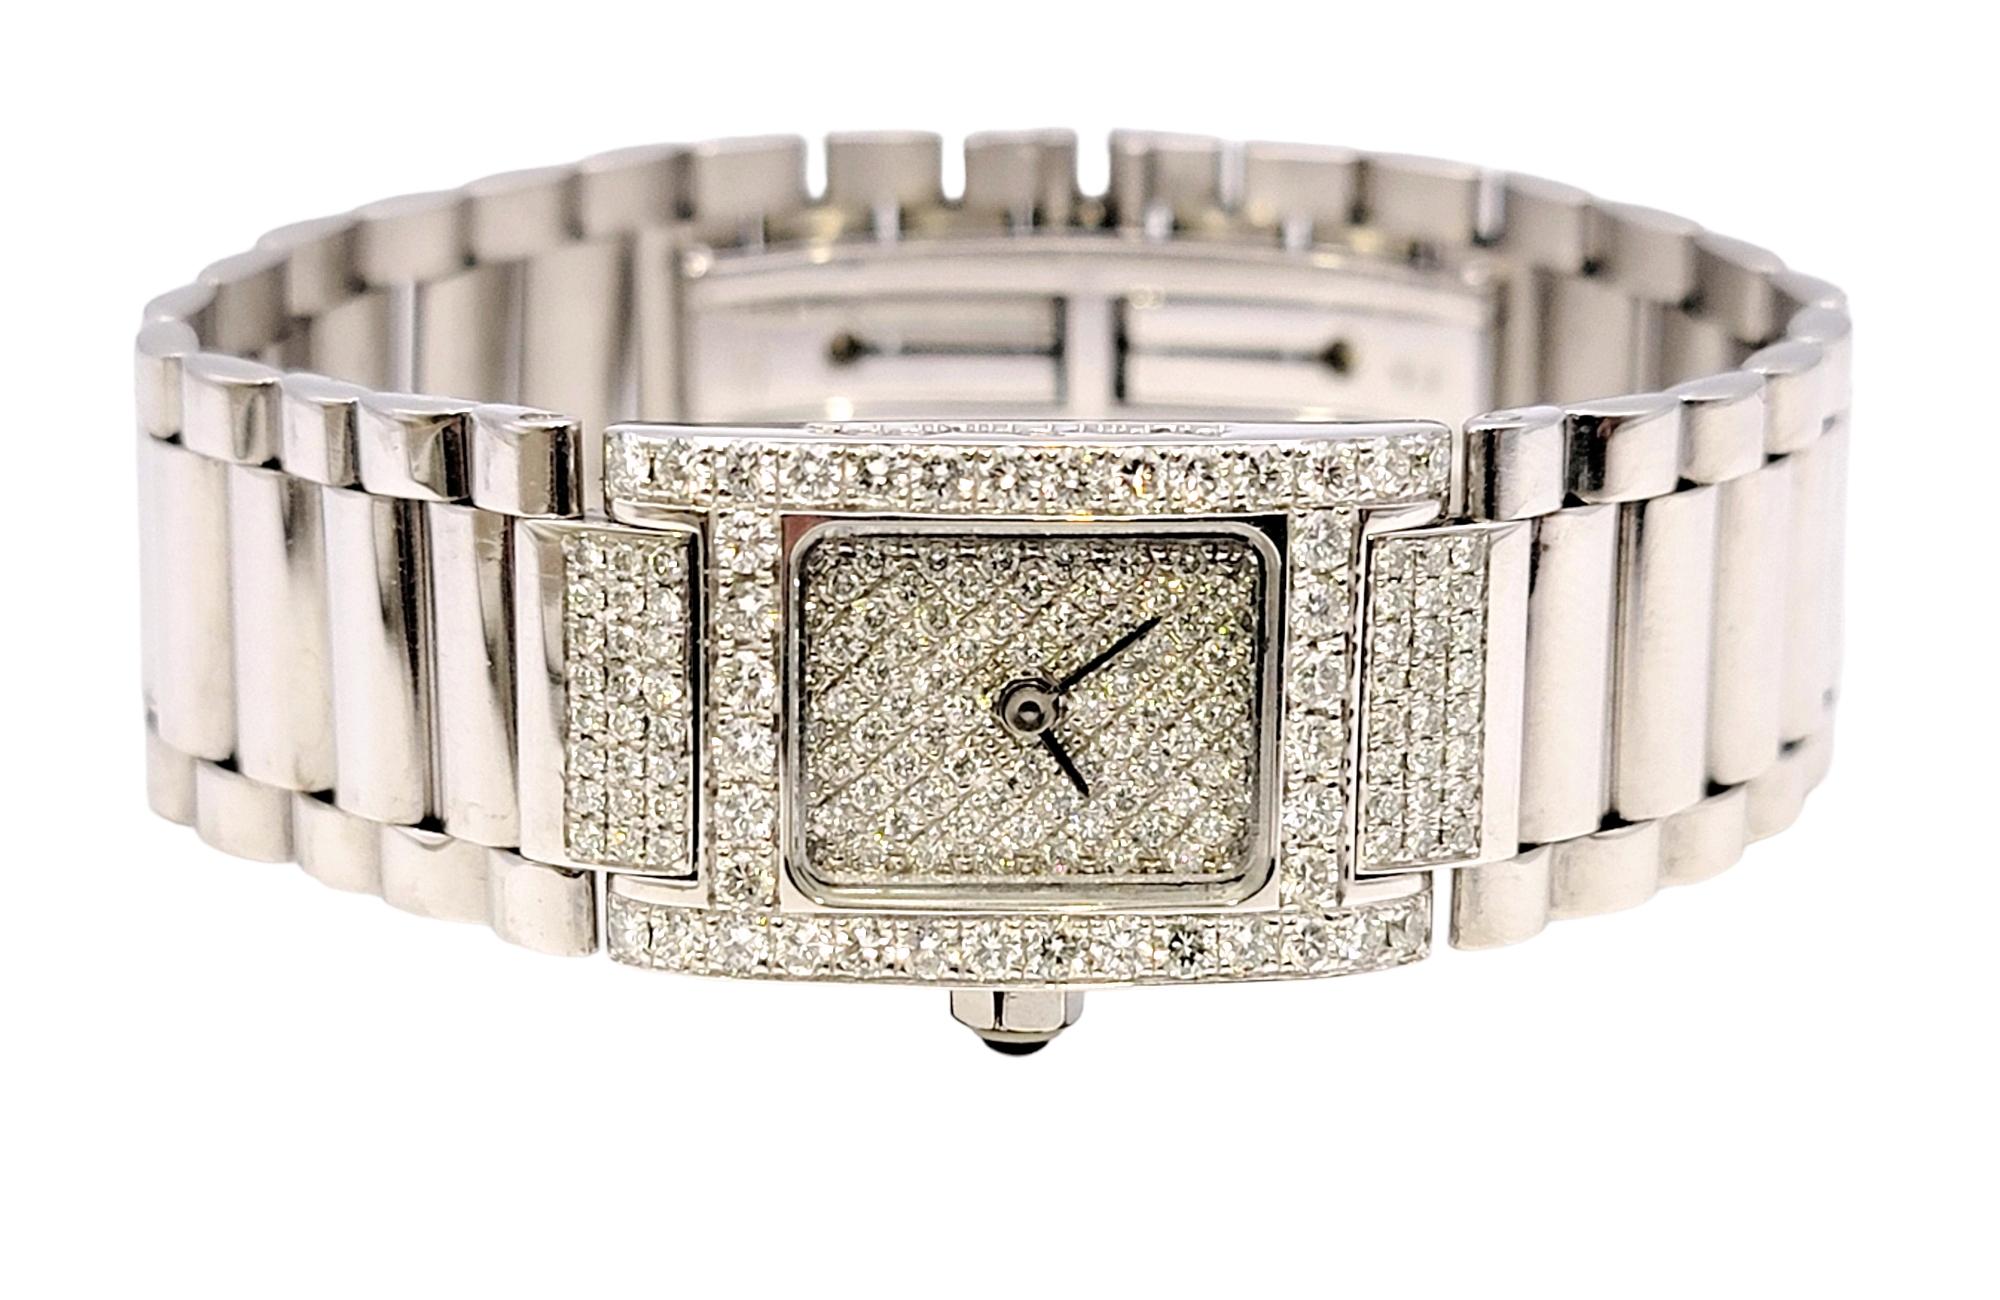 Exquisite designer wristwatch by Alain Philippe embellished with 2.00 carats of glittering icy white diamonds. The elongated rectangular diamond dial features steel hands, a manual wind and a round black cabochon on the crown. The flexible links are